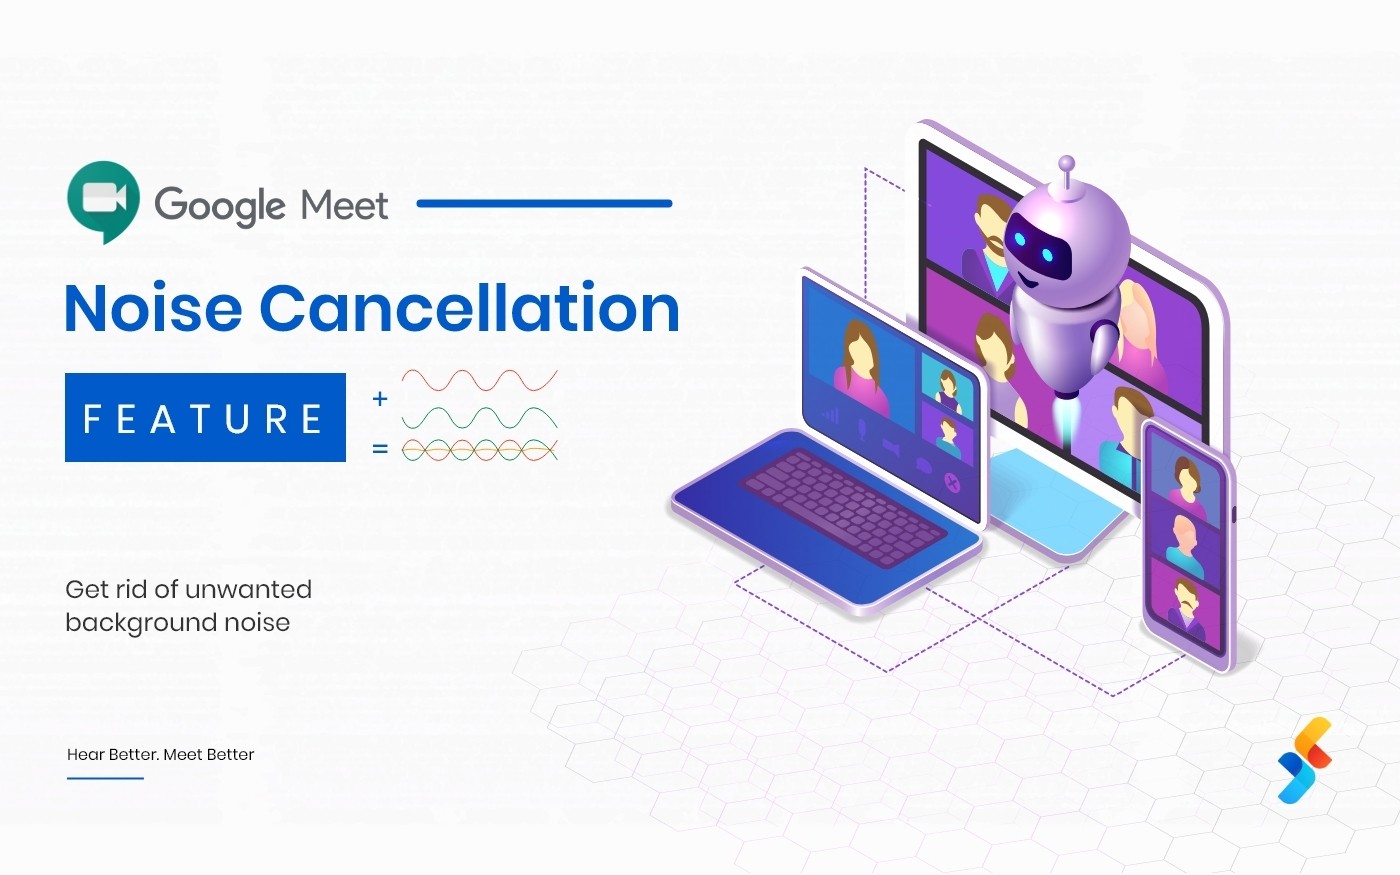 Google Meet Introduces AI and Machine Learning-Based Noise Cancellation Feature